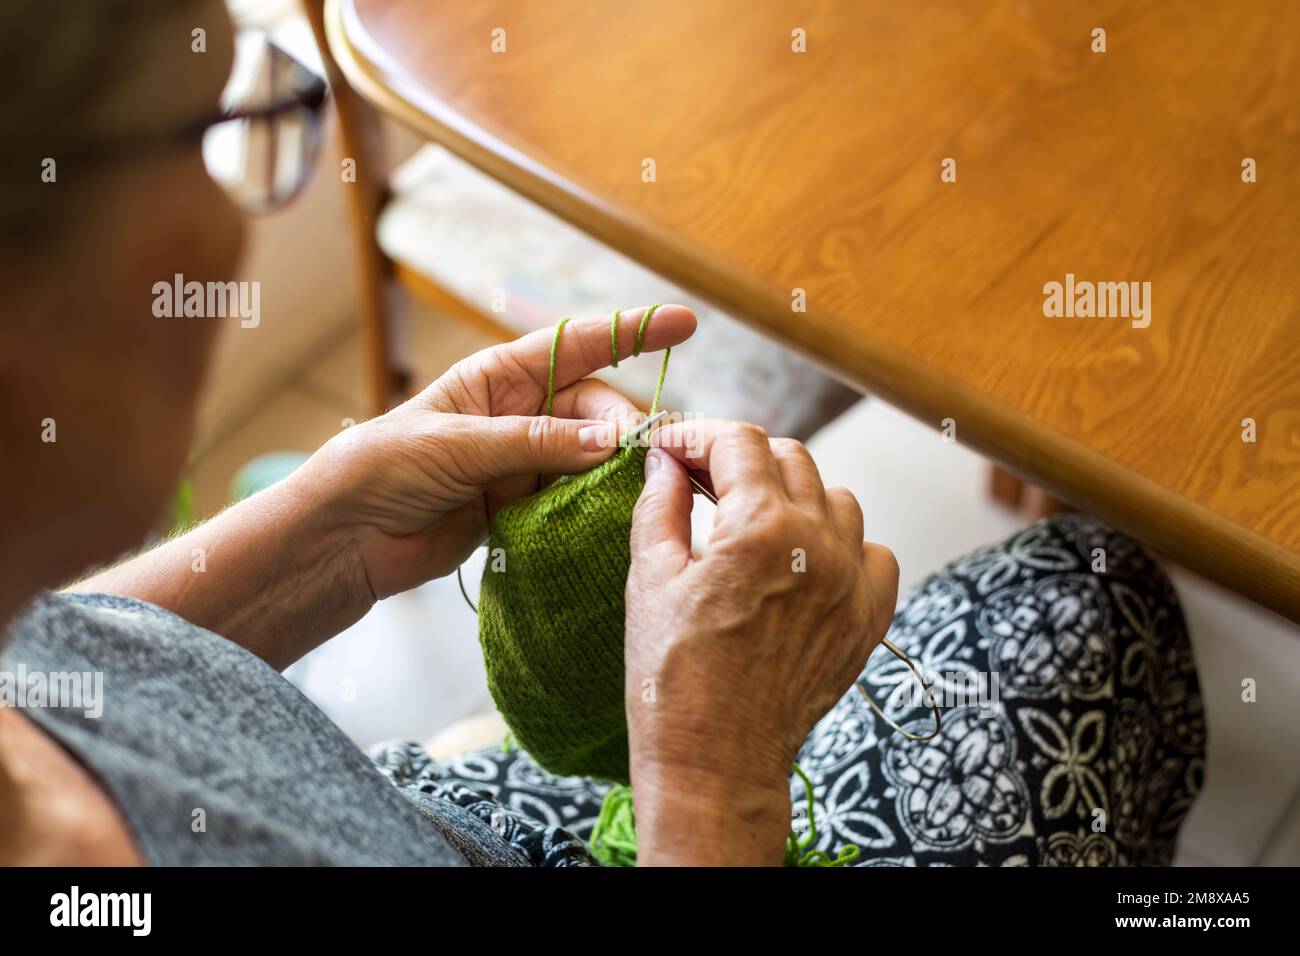 Close-up of hands of an older woman knitting socks with green wool and circular needles Stock Photo